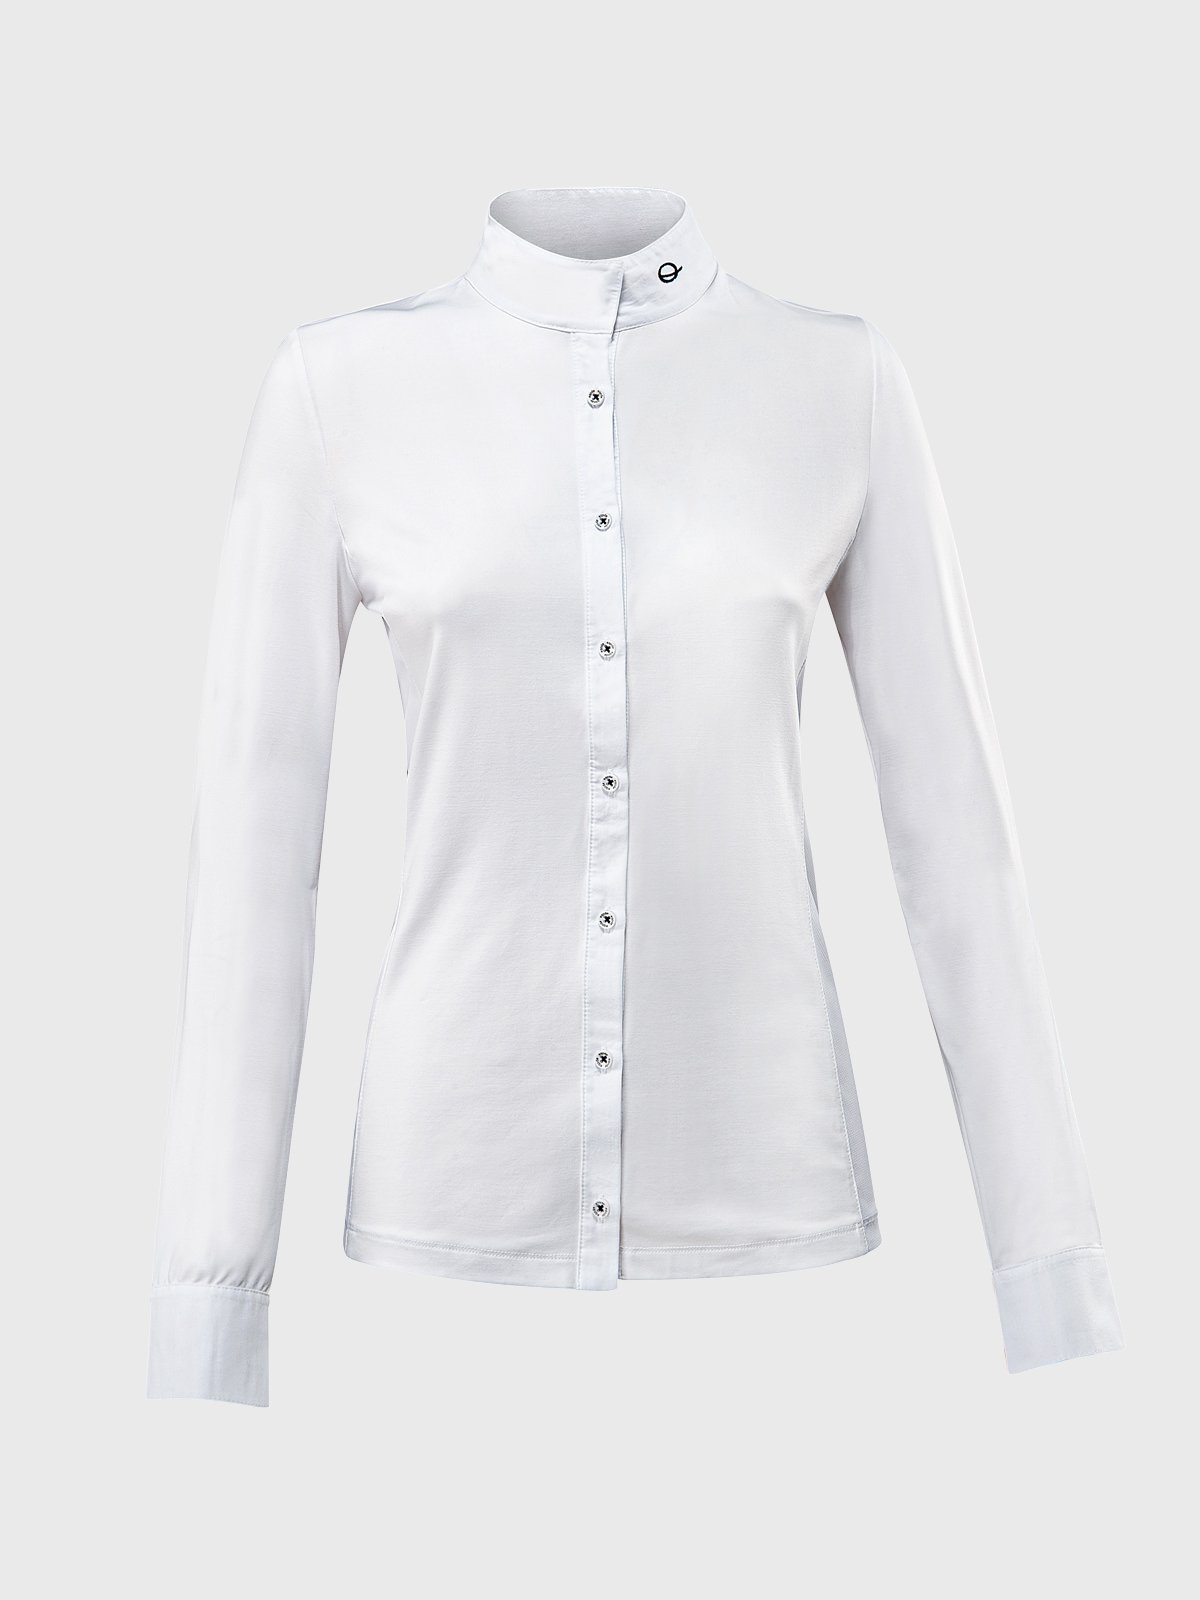 EQODE WOMEN'S SHOW SHIRT WITH LONG SLEEVES 1